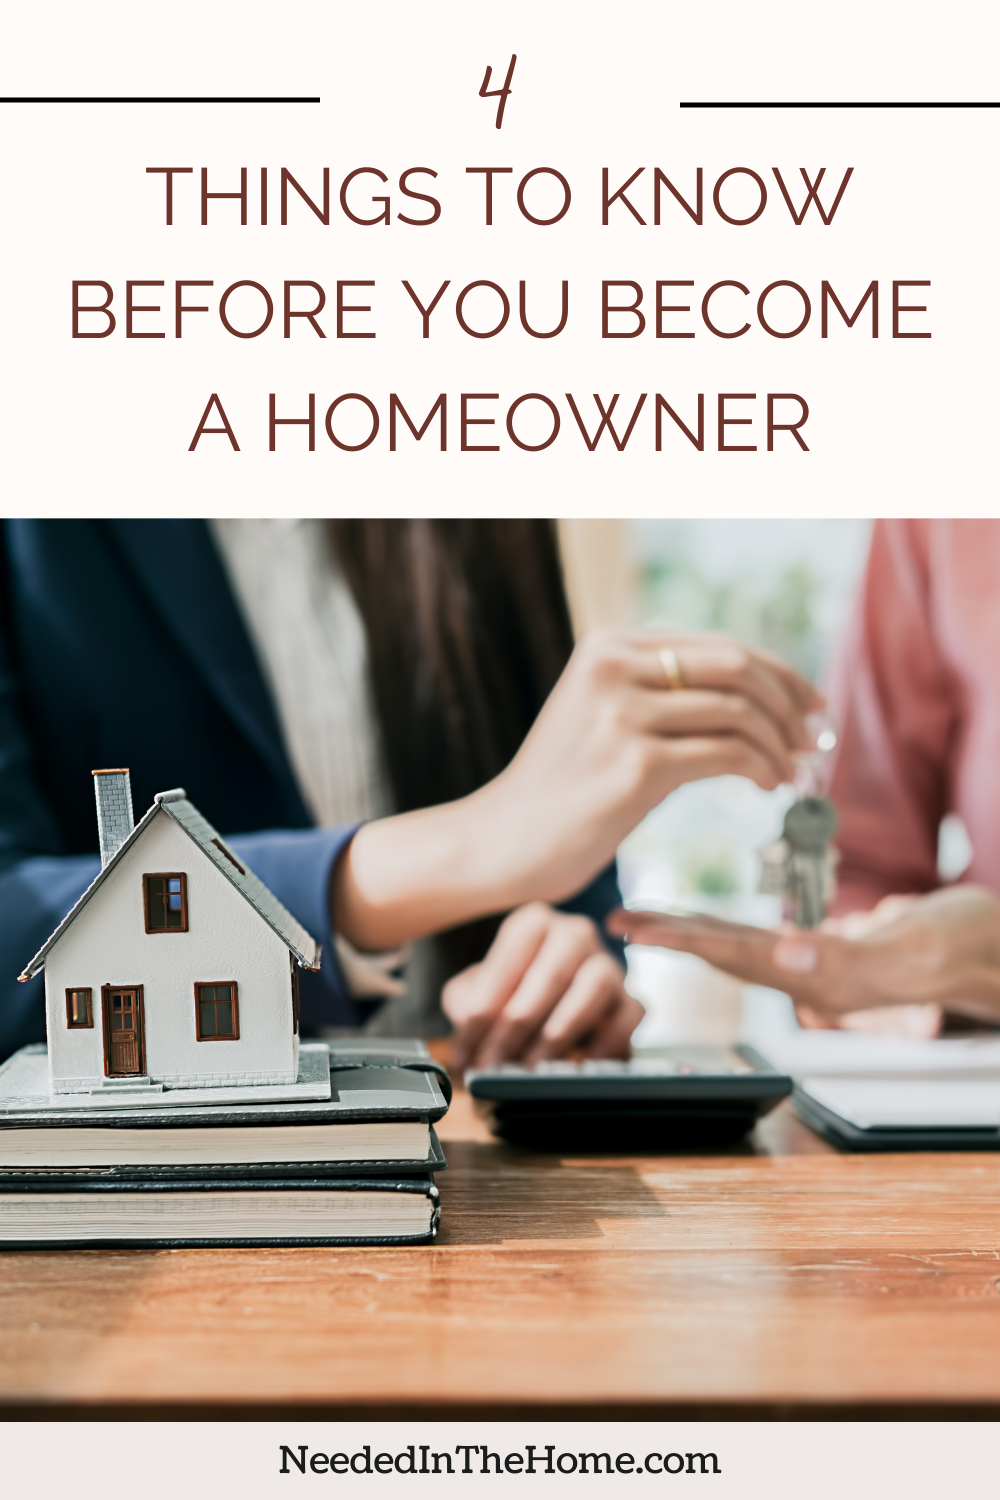 pinterest-pin-description 4 things to know before you become a homeowner model house on stack of books calculator next to hand giving keys to another's hand neededinthehome